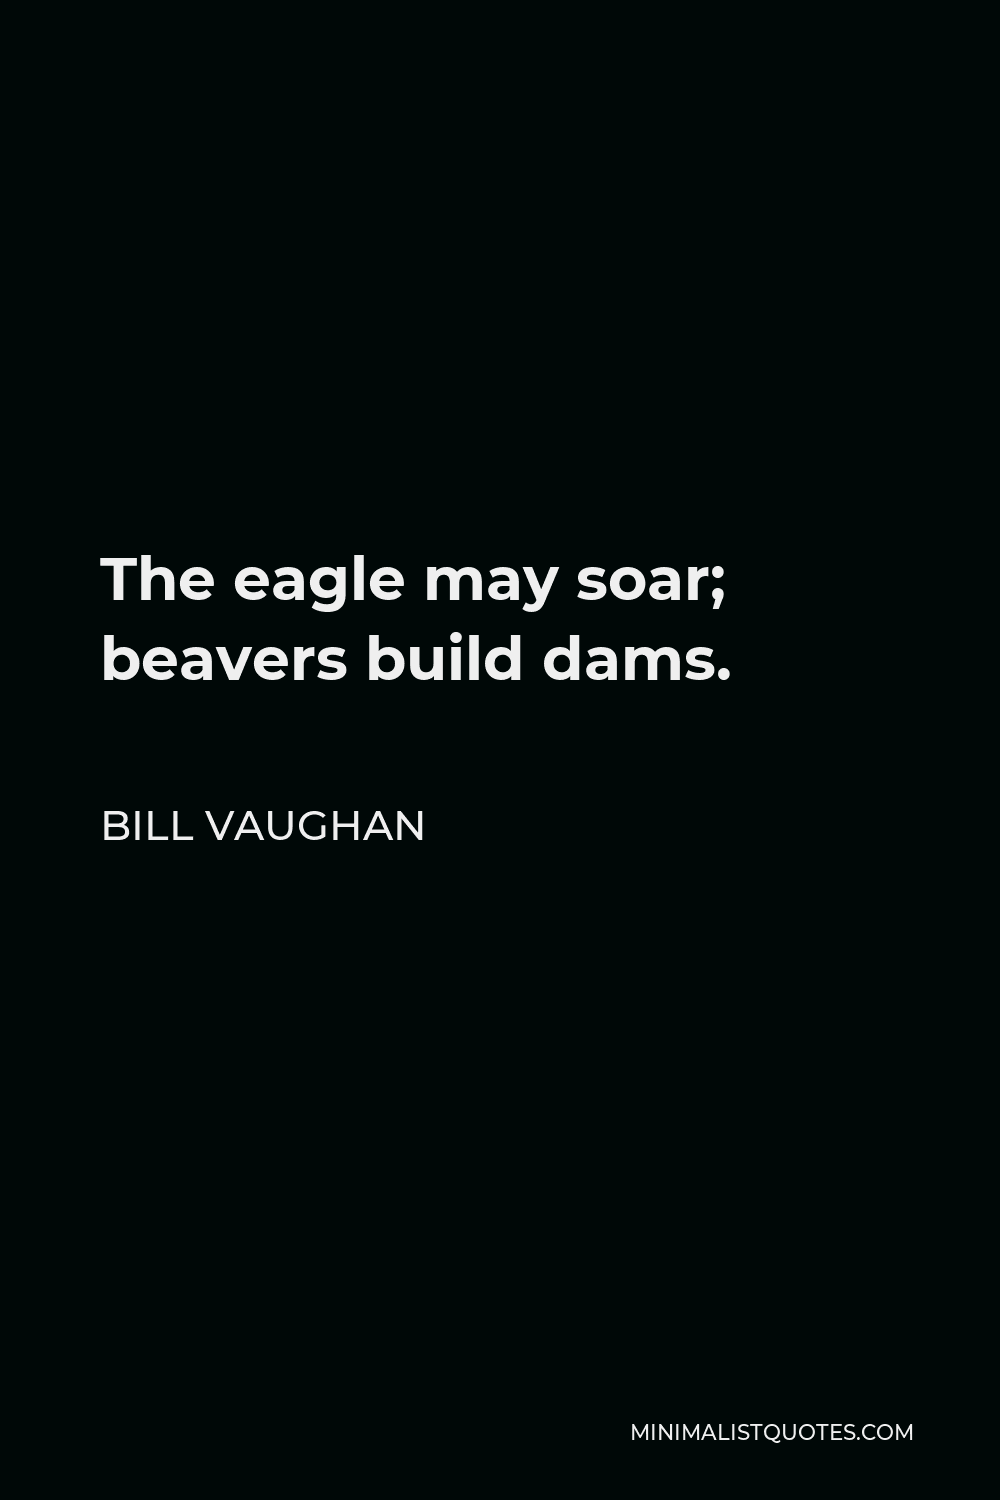 Bill Vaughan Quote - The eagle may soar; beavers build dams.